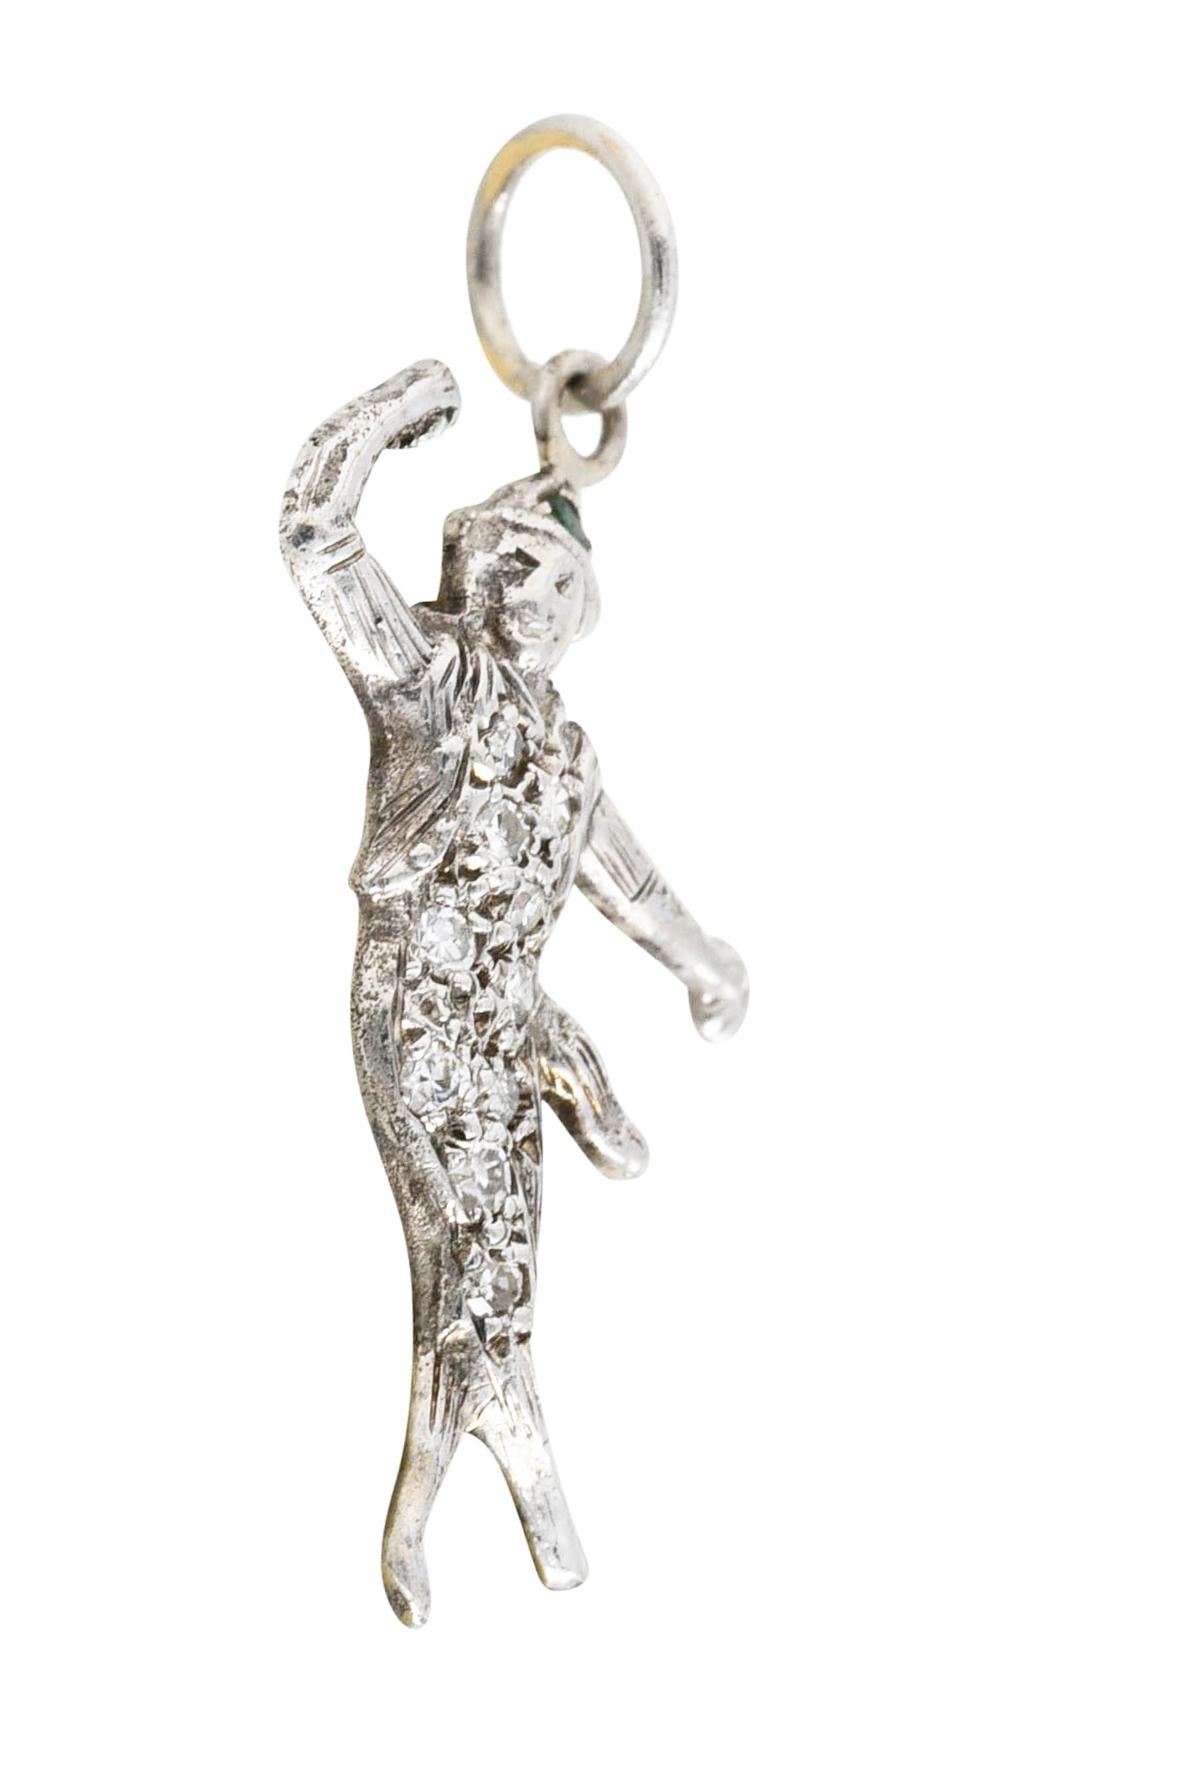 Charm is designed as a highly rendered dancer with a sashed belt, cropped jacket, and pointed hat. Body is pavè set with single cut diamonds while hat is accented by a round cut emerald. Total gemstone weight is approximately 0.18 carat. Tested as